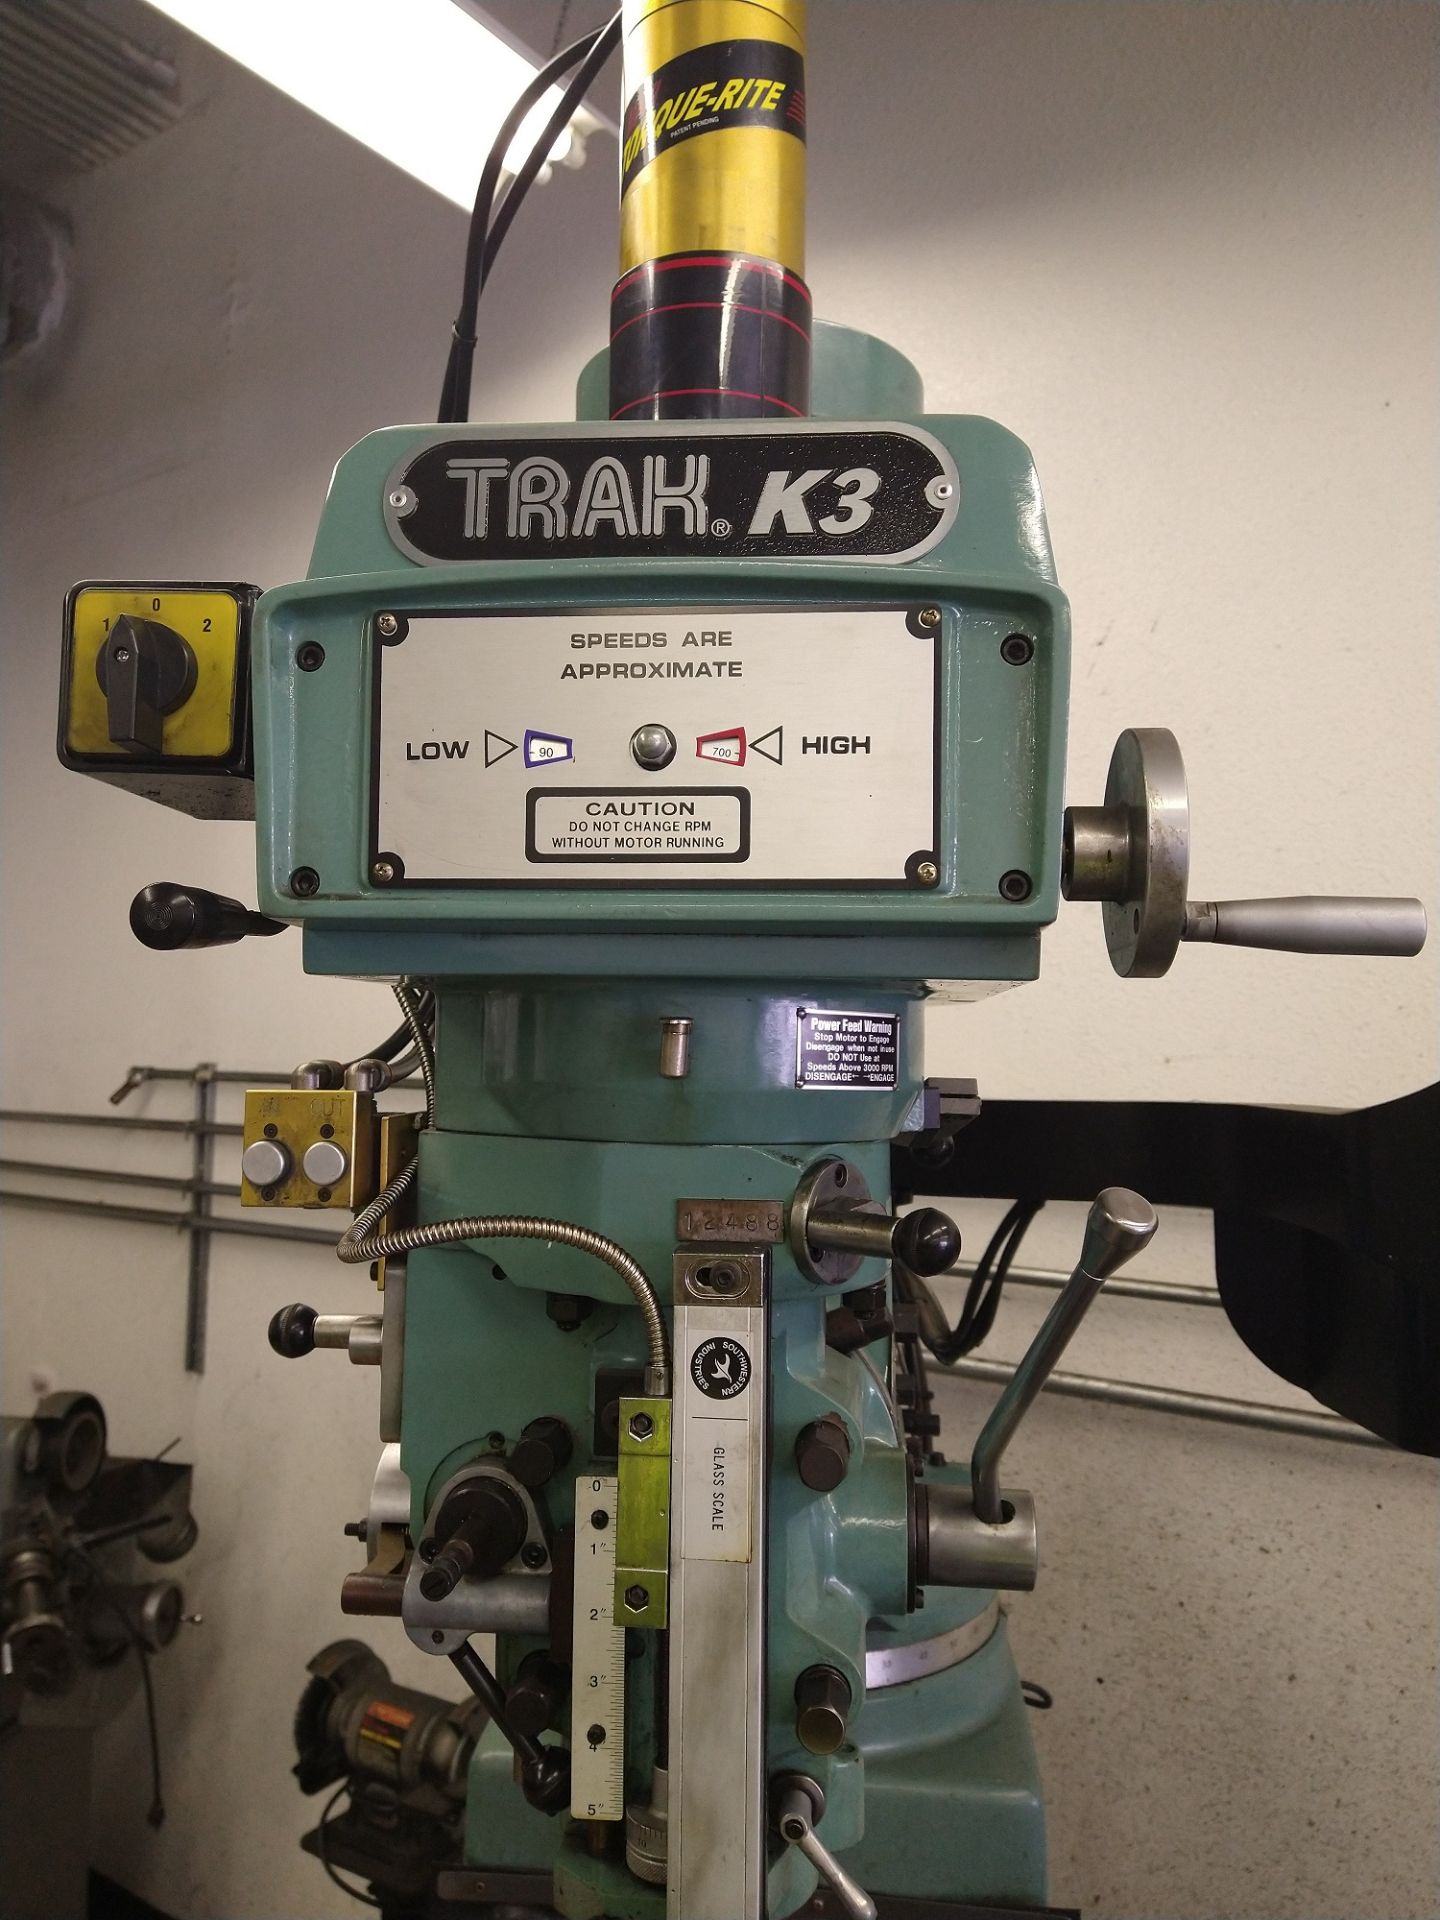 2013 TRAK K3SX CNC KNEE MILL, TRAVELS: 32" X 16" X 16", 50" X 10" TABLE, R8 SPINDLE TAPER, 4200 RPM, - Image 4 of 6